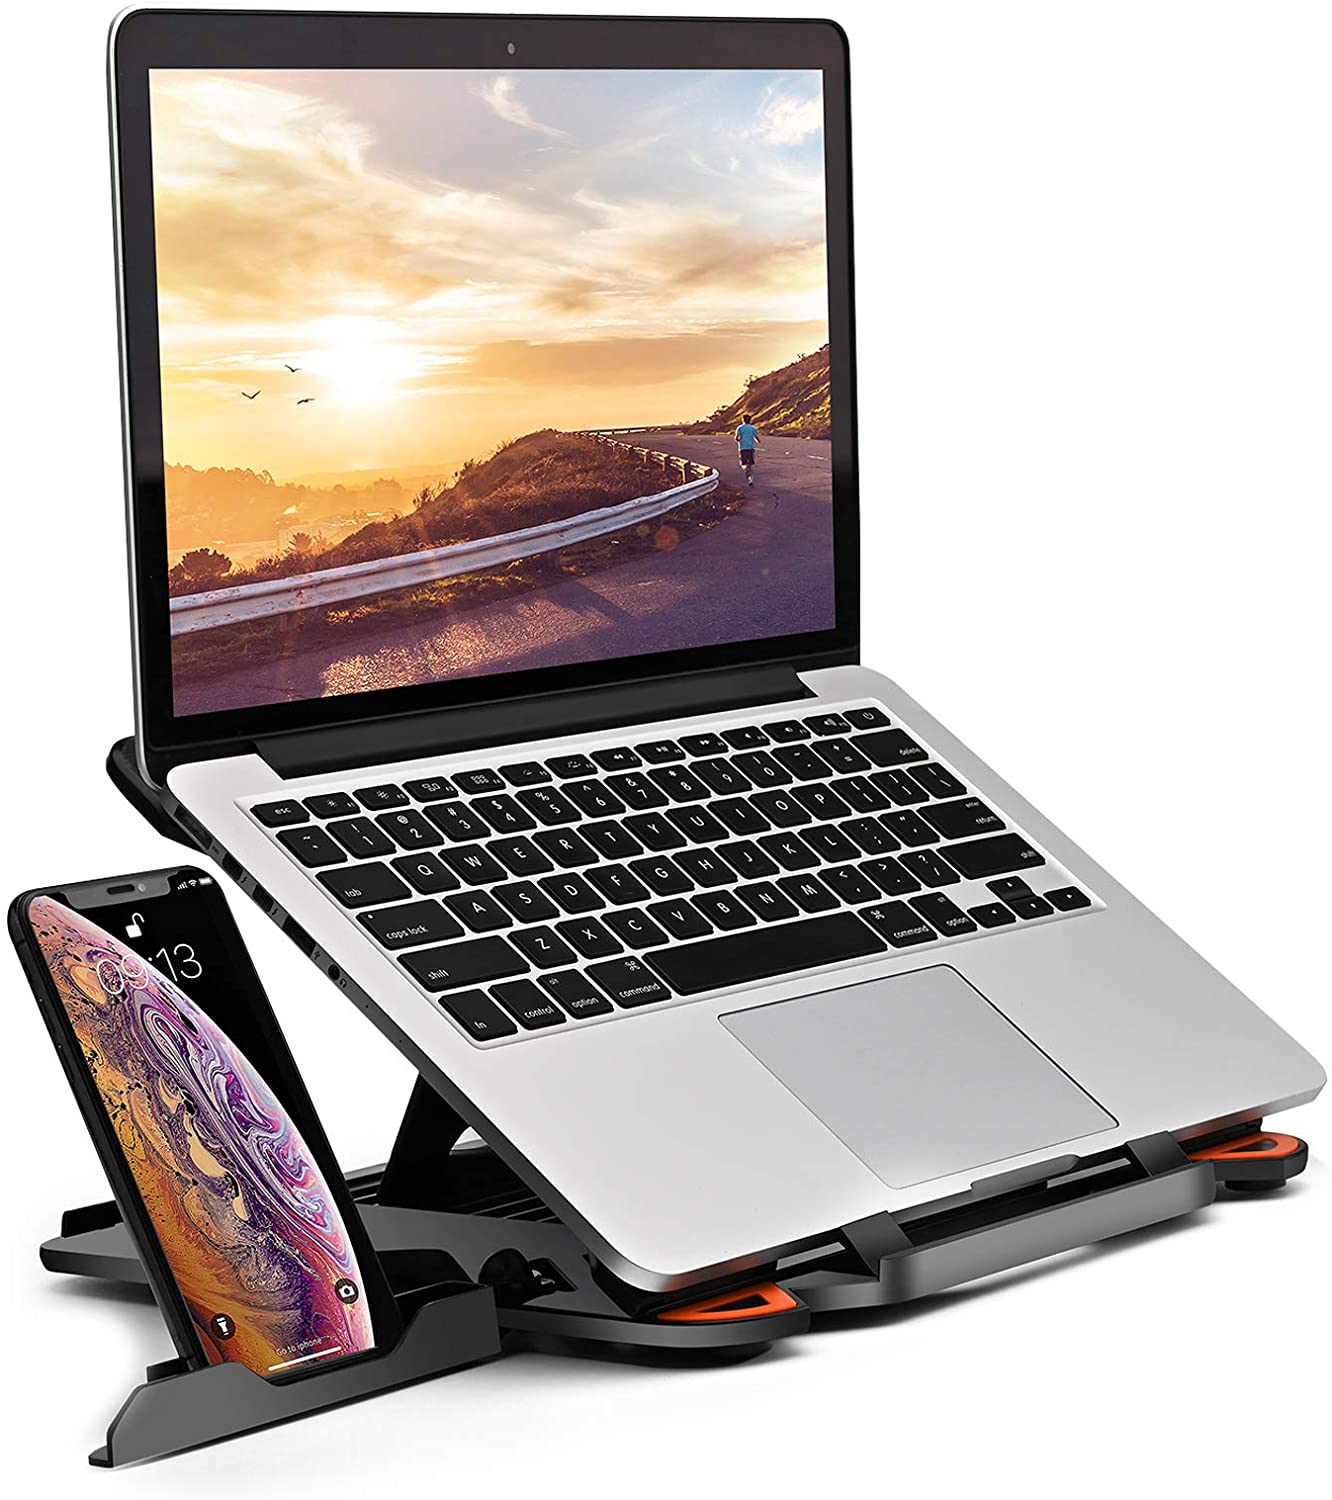 Laptop Stand Adjustable Laptop Computer Stand Multi-Angle Stand Phone Stand Portable Foldable Laptop Riser Notebook Holder Stand Compatible for 10 to 17” Laptops - image 1 of 7